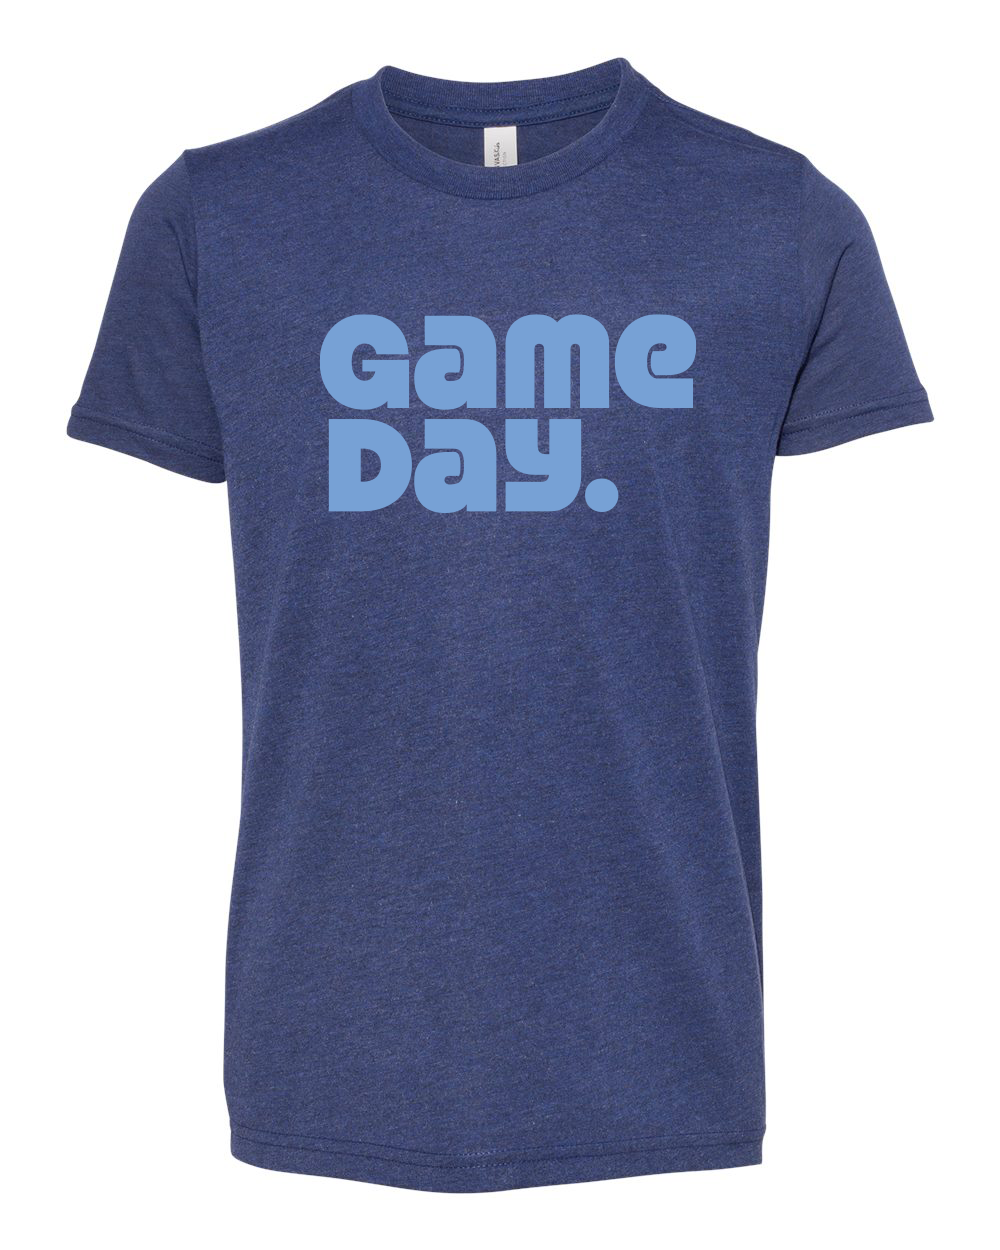 Graphic Tee - Game Day Navy/Lt Blue